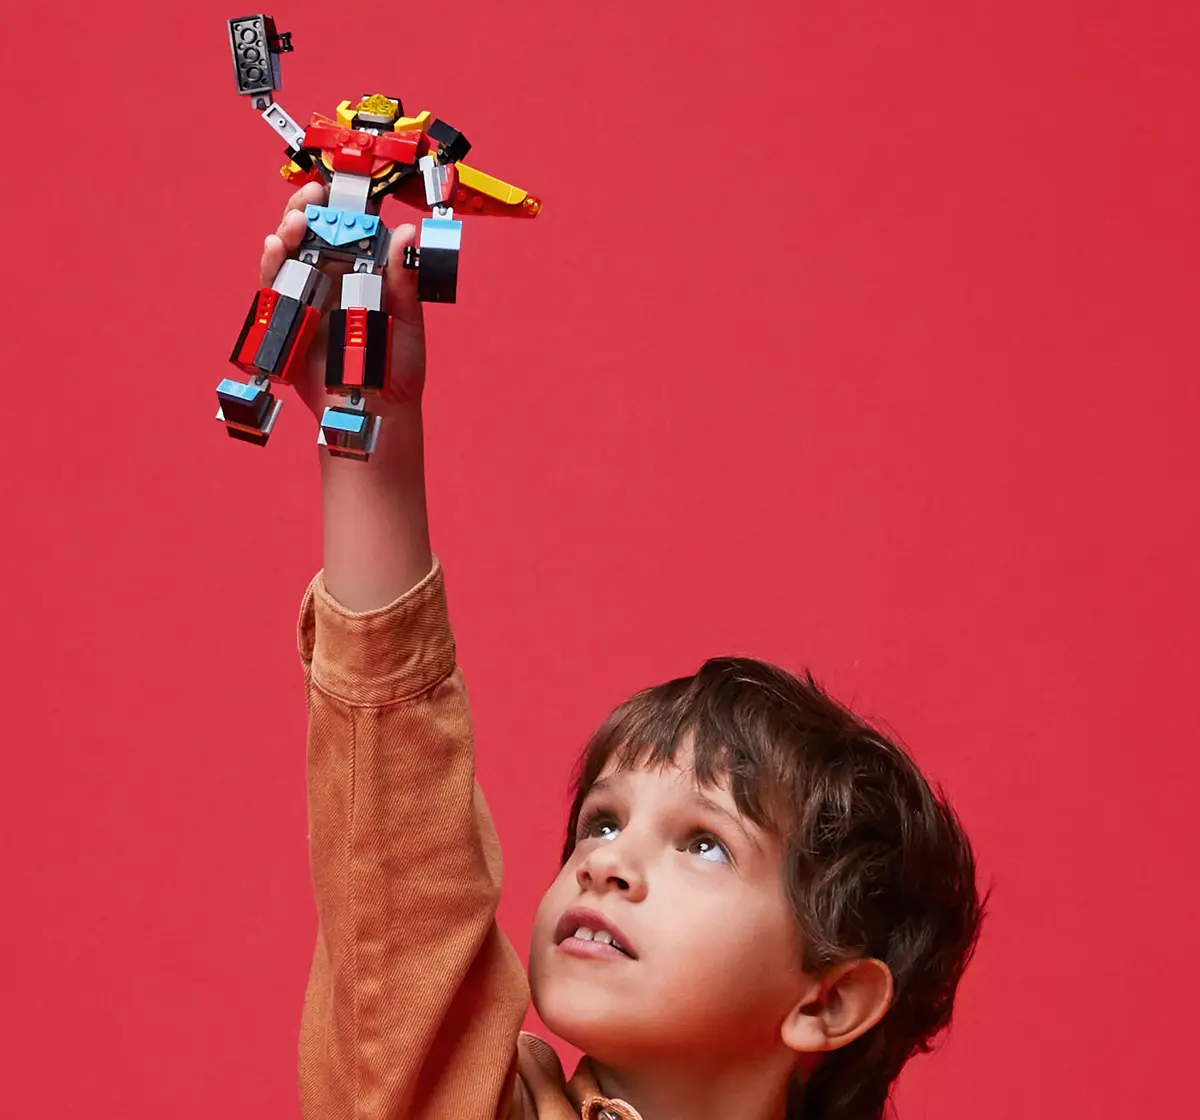 Creator 3in1 Super Robot Building Kit by Lego Featuring a Robot Toy, a Jet Airplane and a Dragon Model for Kids Aged 7 Years + (159 Pieces)